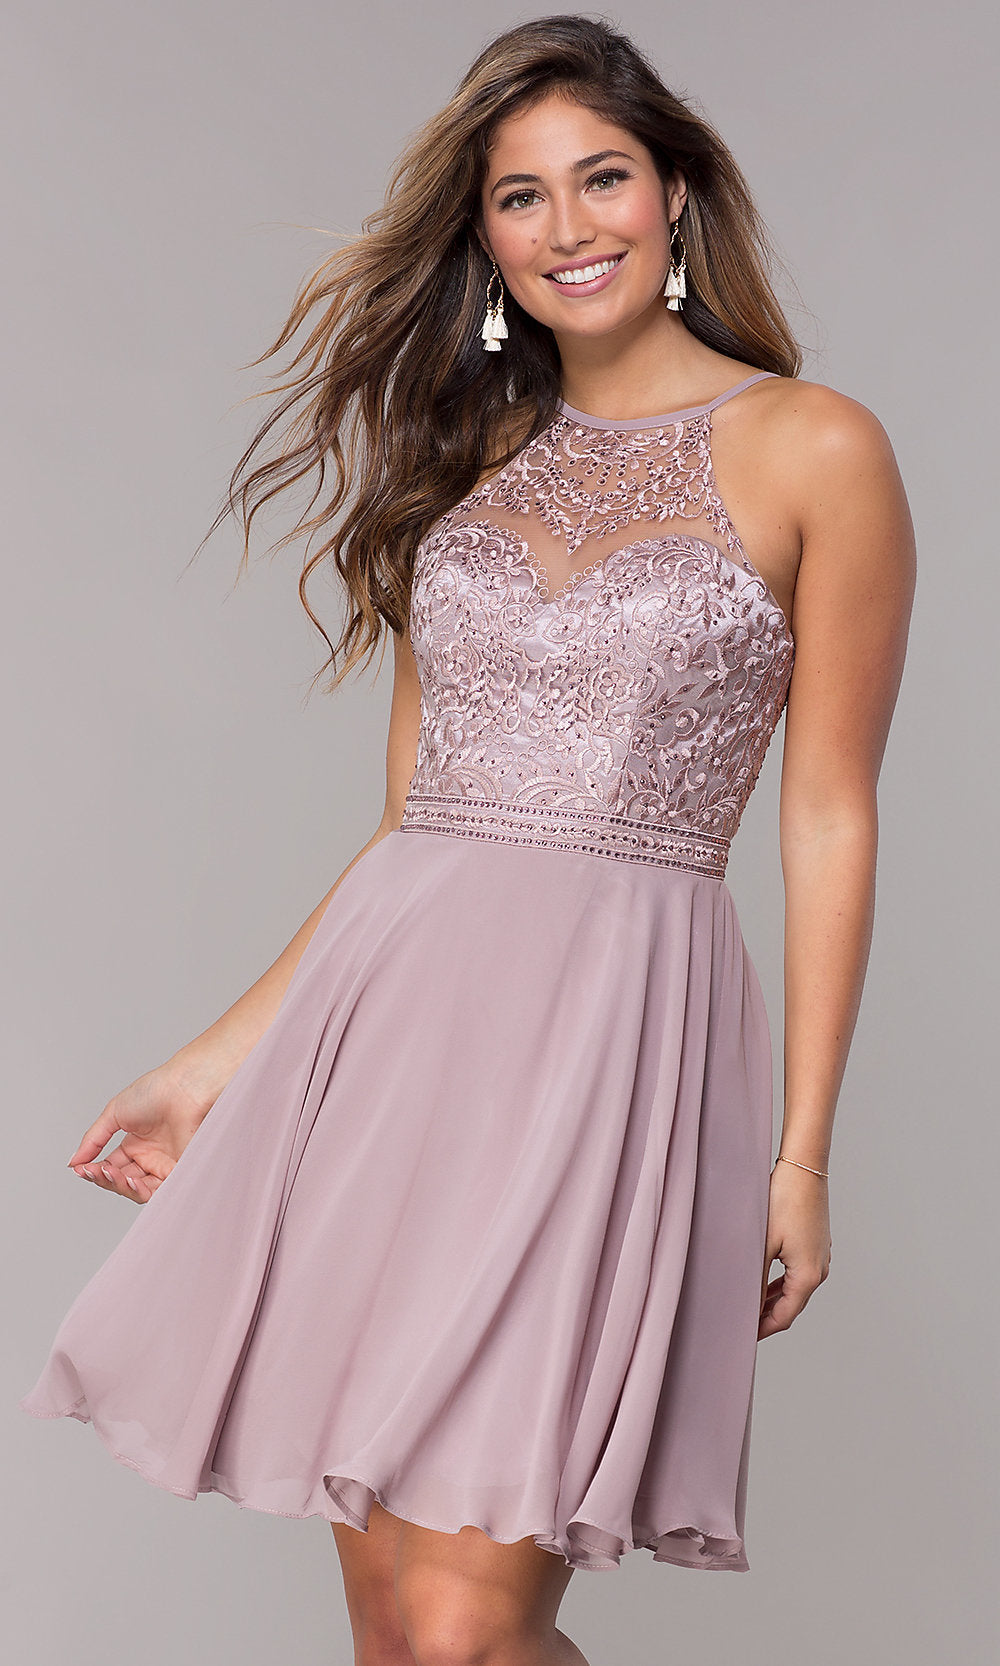 Tan Embroidered-Bodice Short A-Line Homecoming Dress